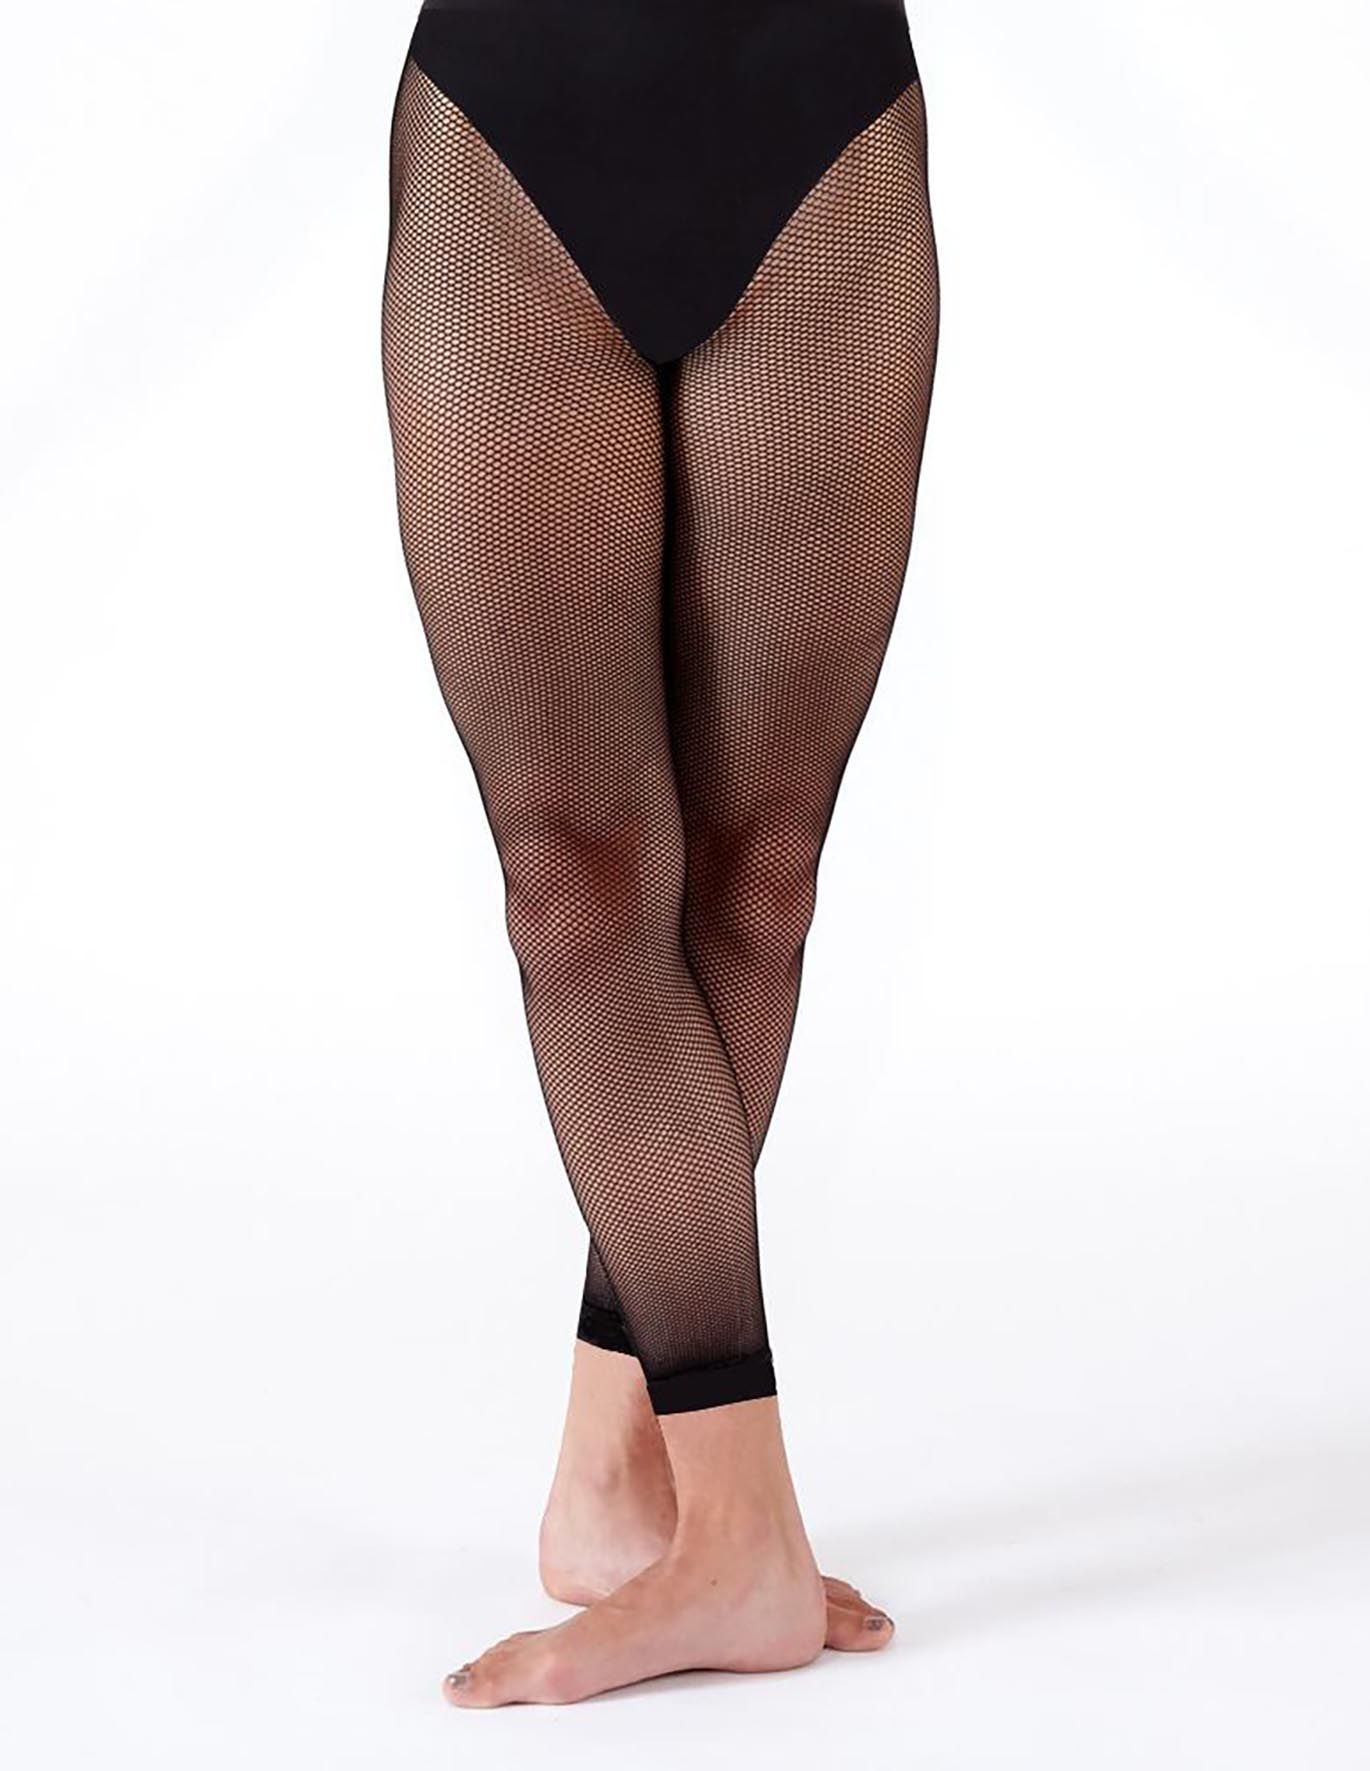 Silky Dance Black and Natural Footless Fishnet Dance Tights